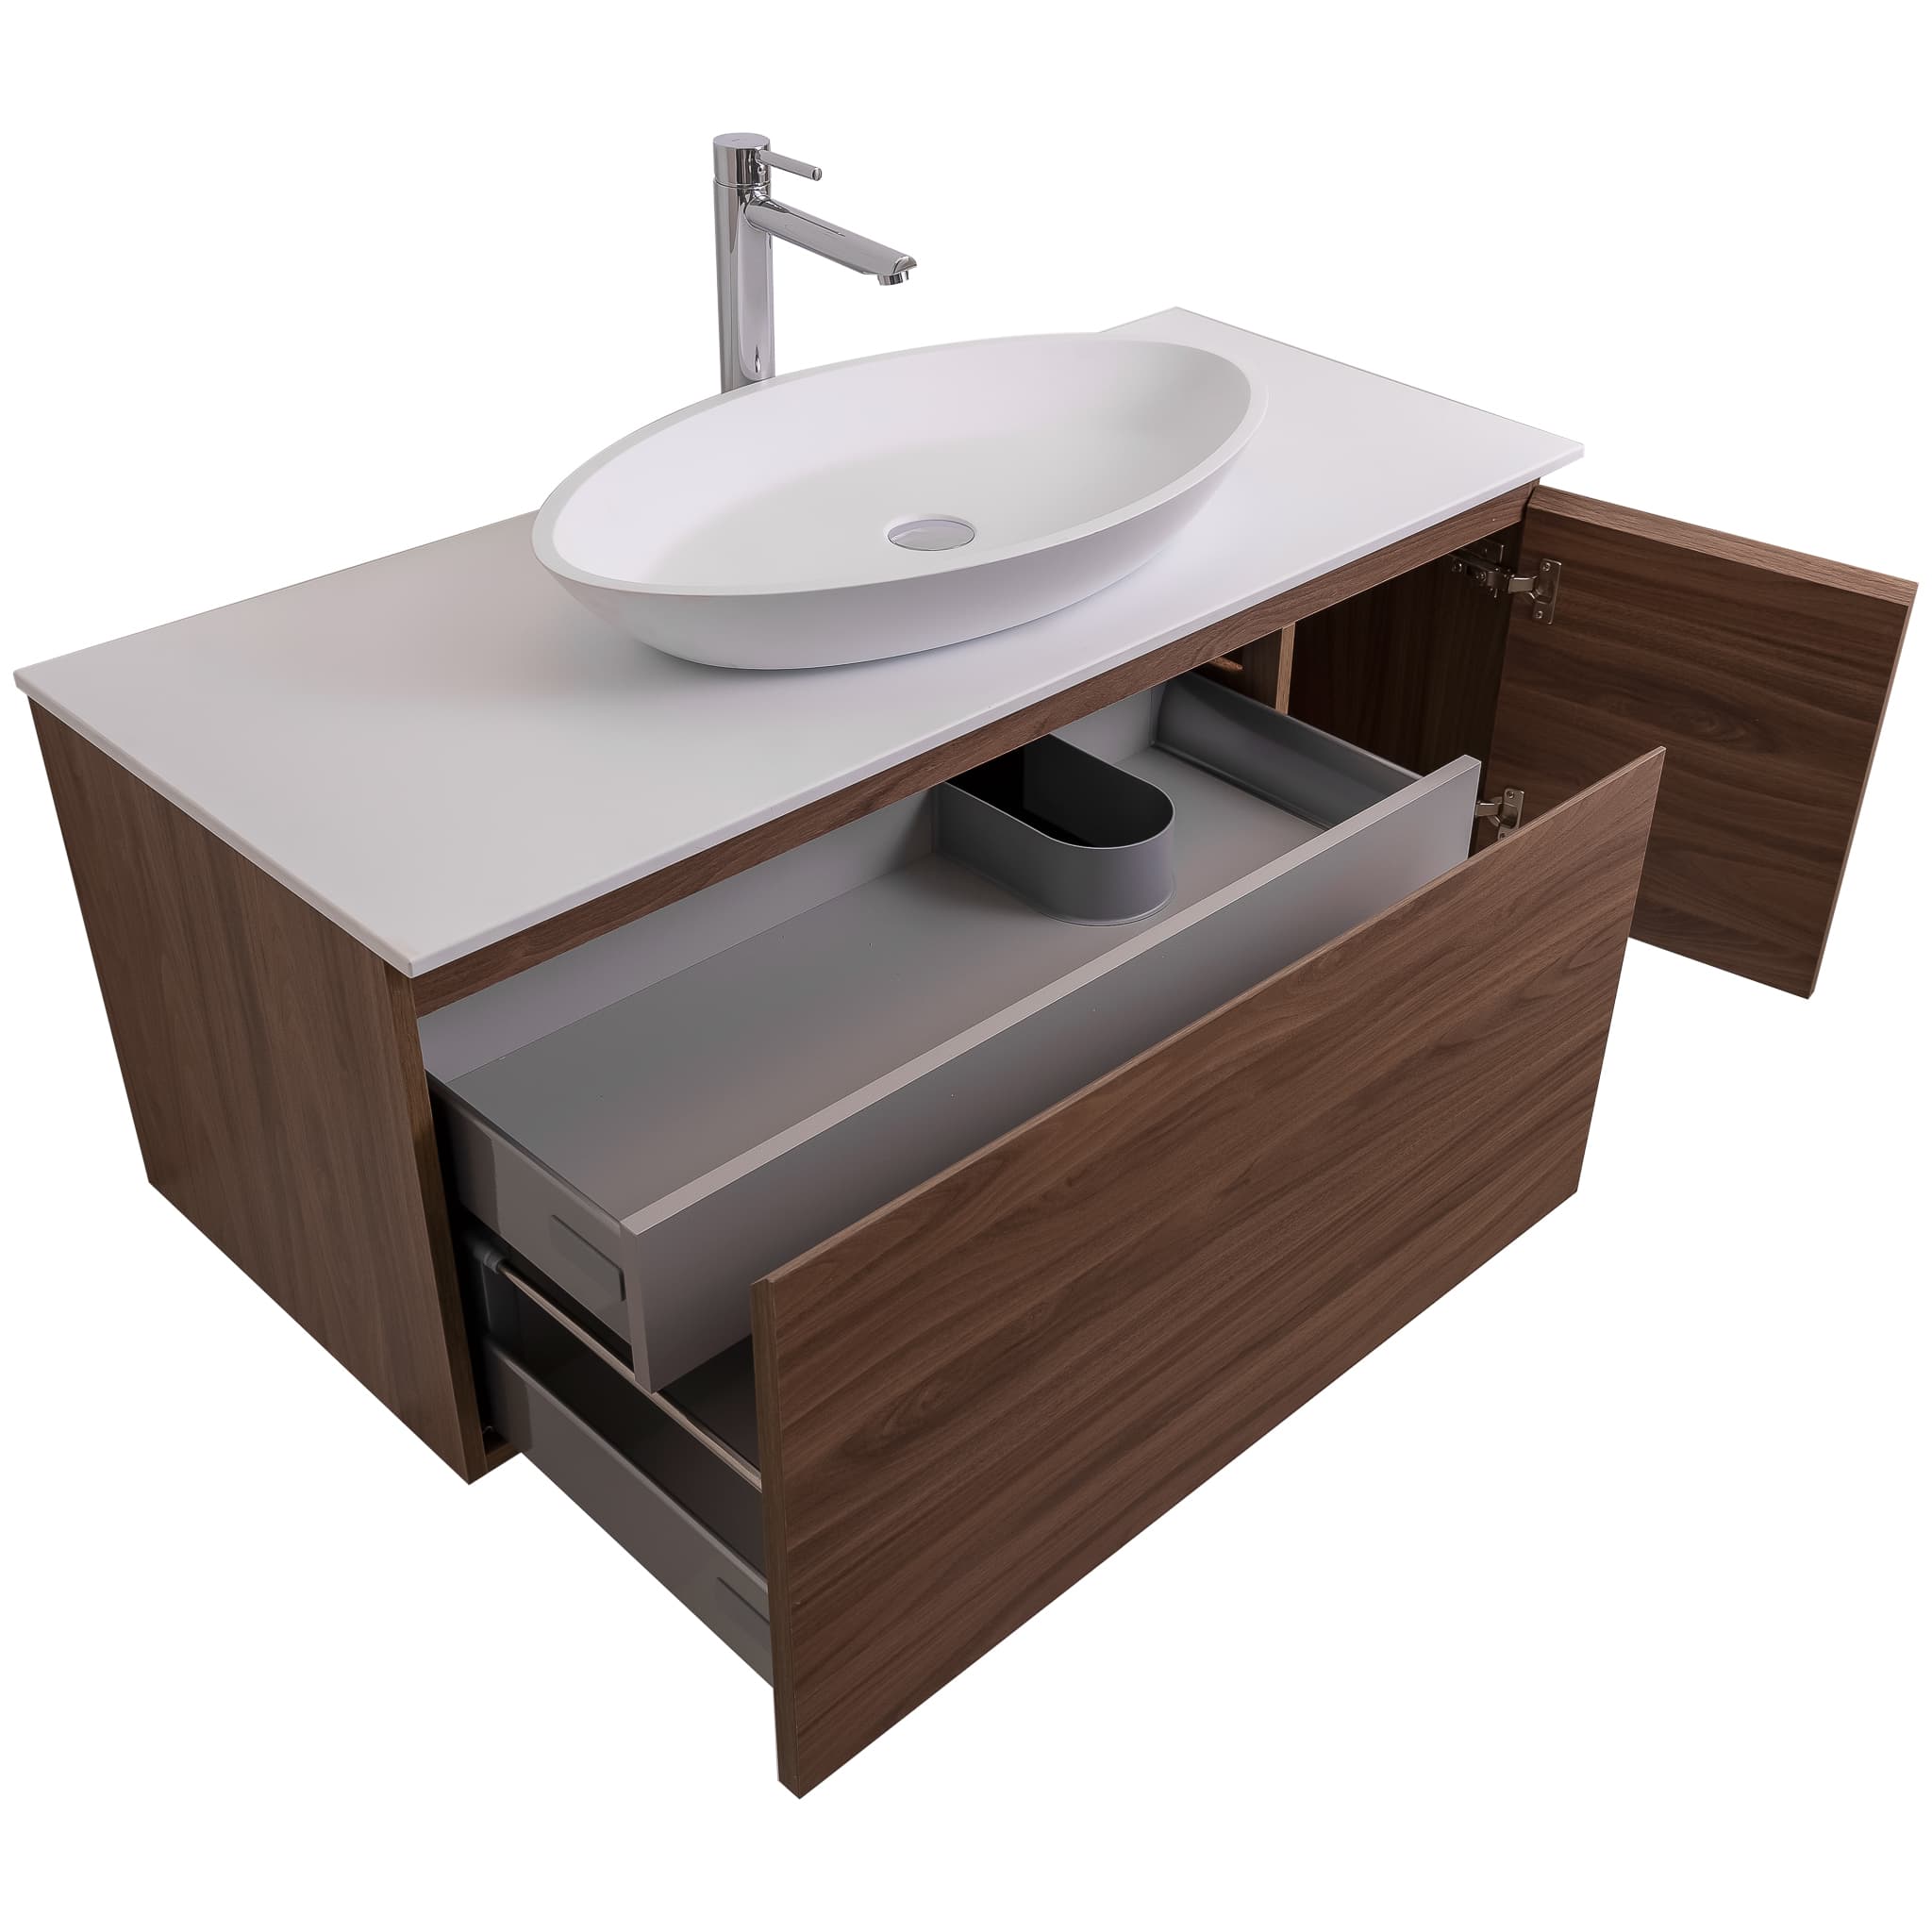 Venice 47.5 Walnut Wood Texture Cabinet, Solid Surface Flat White Counter And Oval Solid Surface White Basin 1305, Wall Mounted Modern Vanity Set